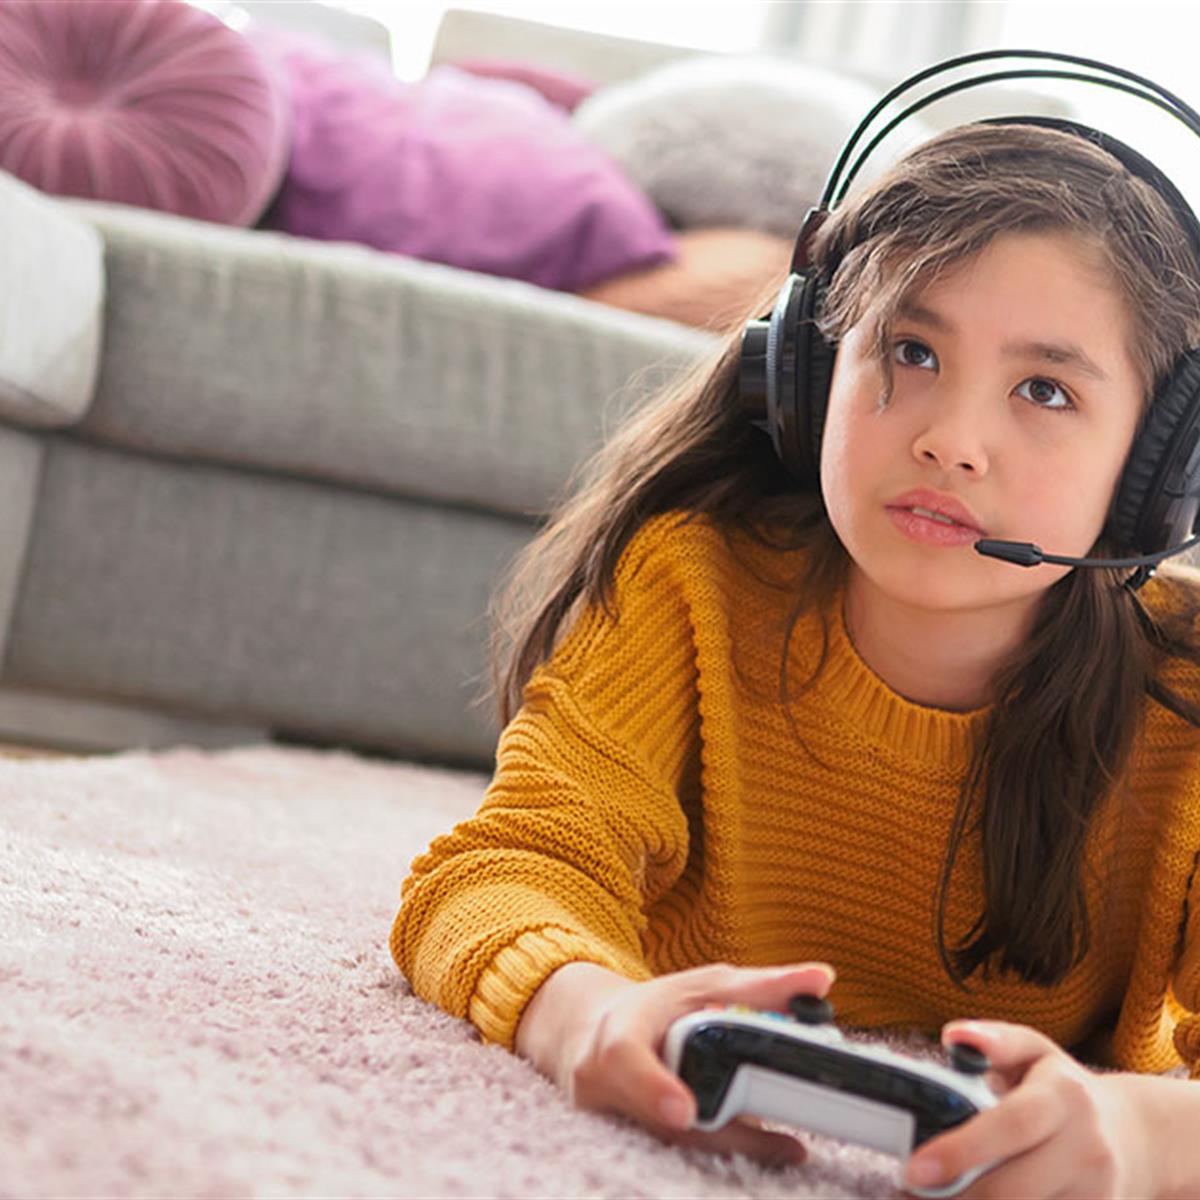 Massively multiplayer online games allow strangers access to children